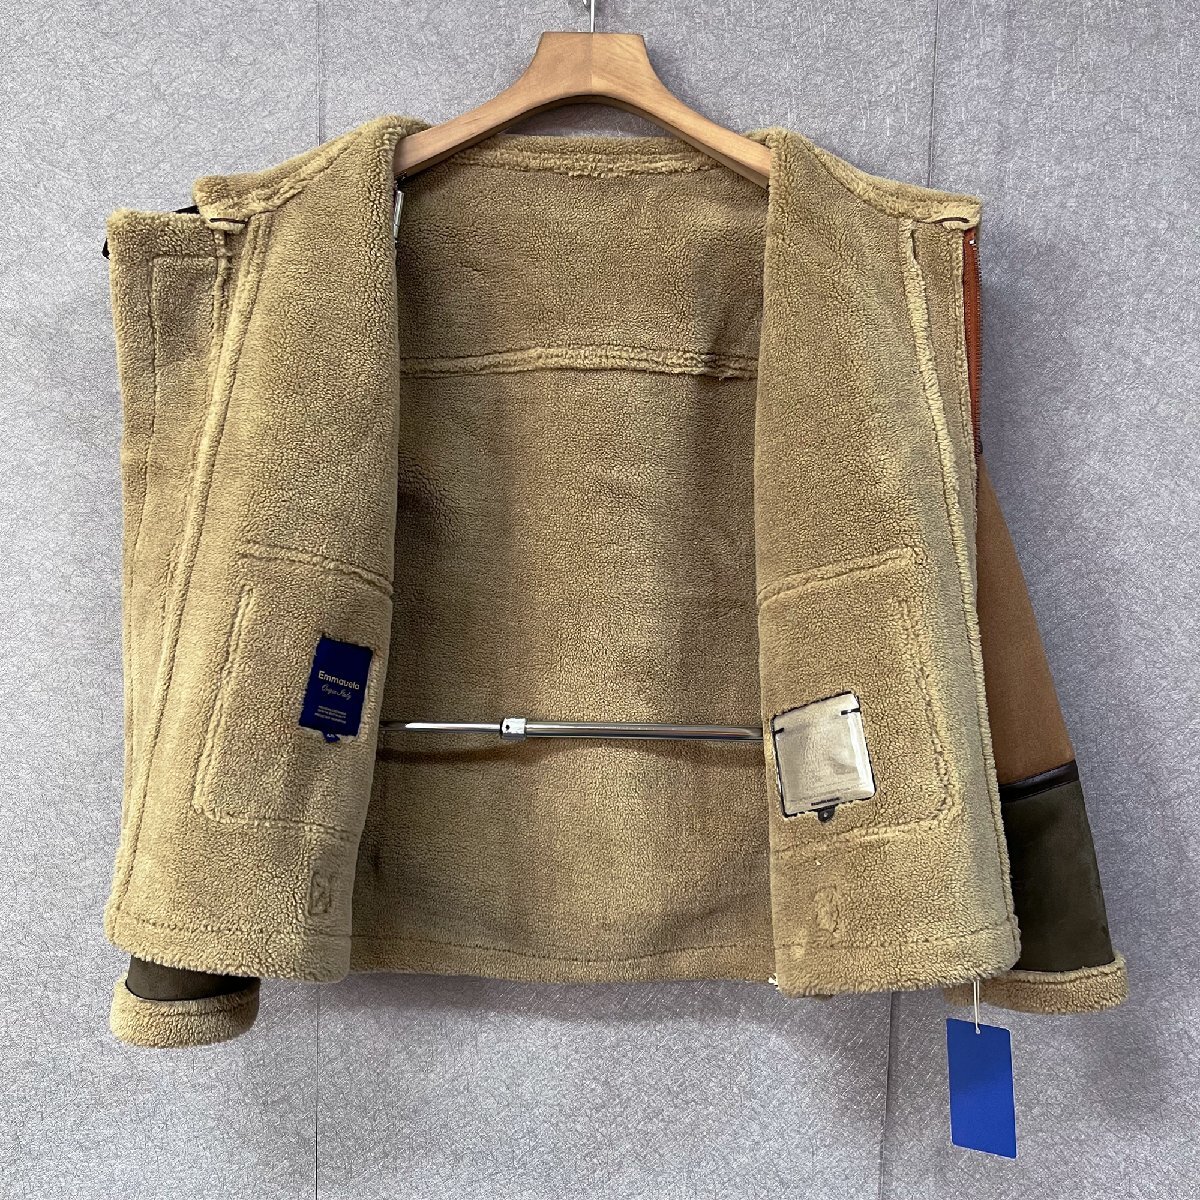  high class * leather jacket regular price 13 ten thousand *Emmauela* Italy * milano departure * fine quality sheep leather sheepskin reverse side nappy -ply thickness protection against cold Rider's boma-L/48 size 